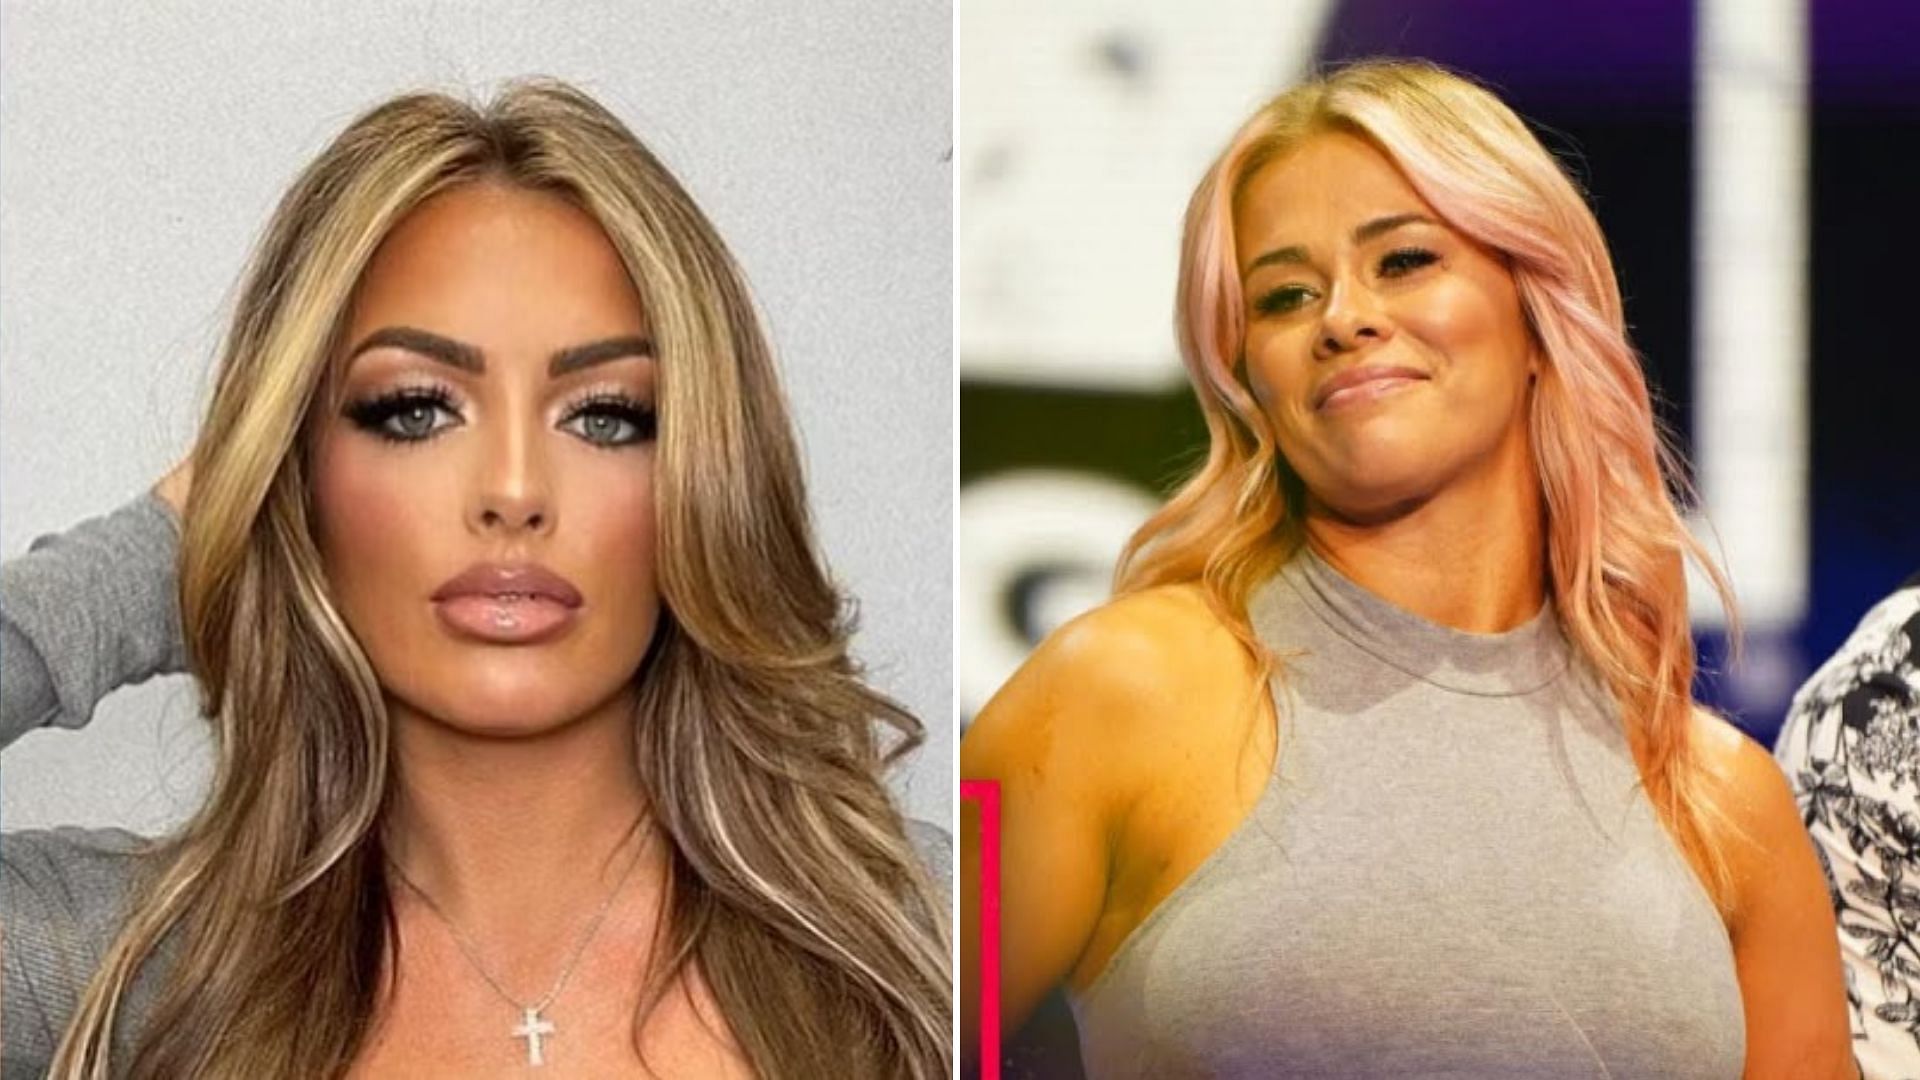 Mandy Rose (left) and Paige VanZant (right).